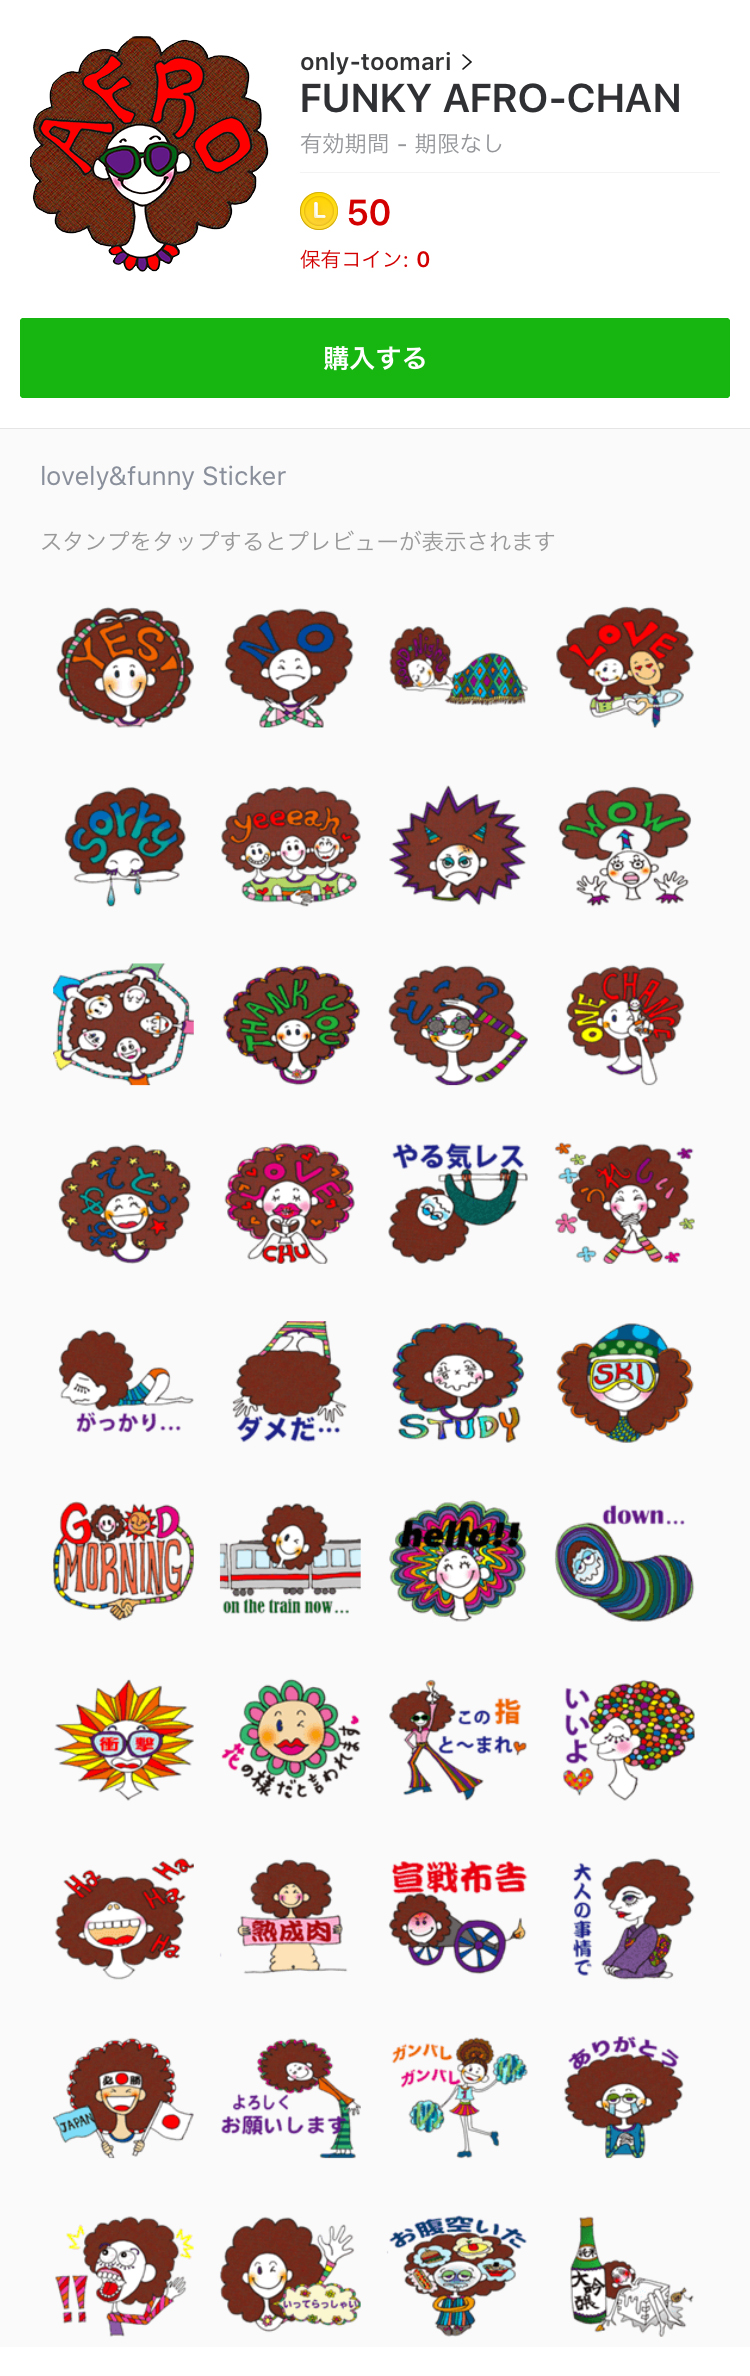 line_afro